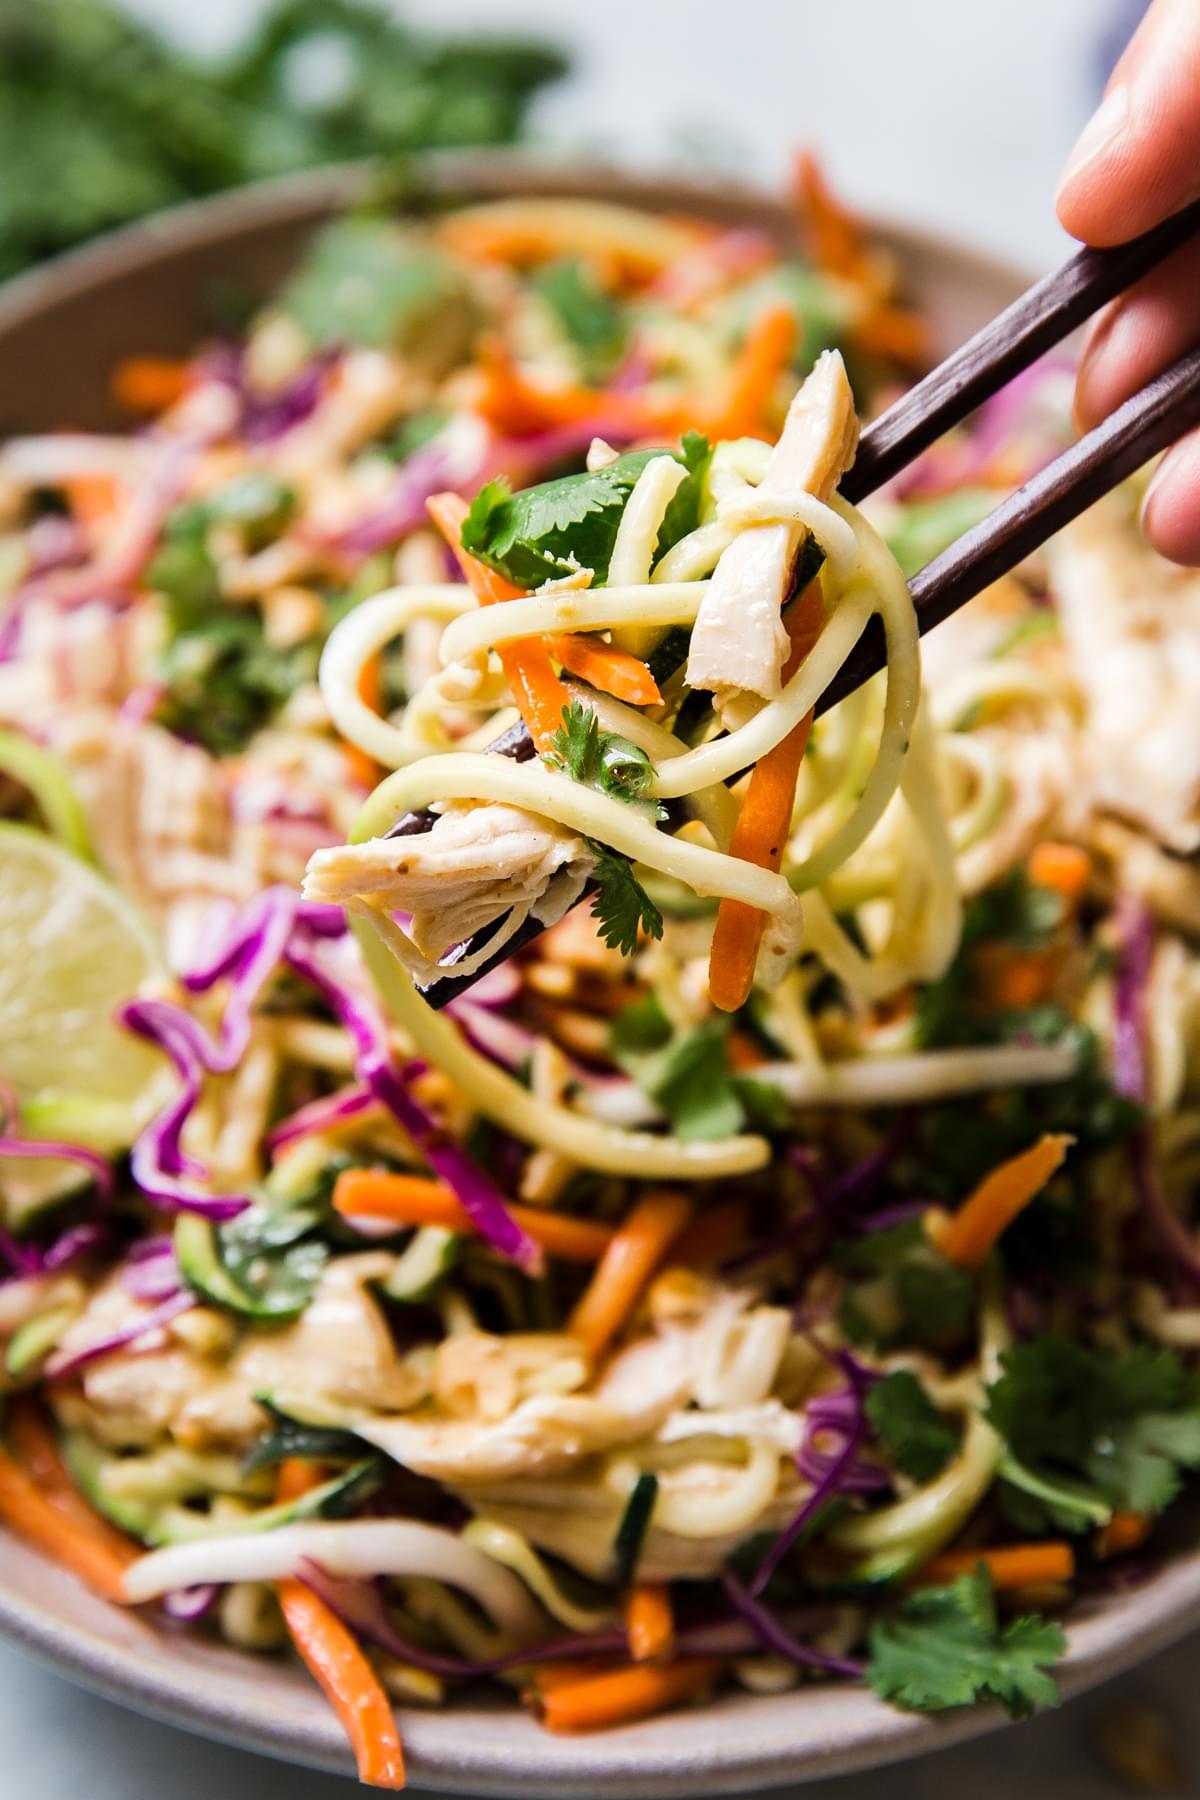 Thai Zucchini Noodle Salad being scooped up with wooden chop sticks from a bowl